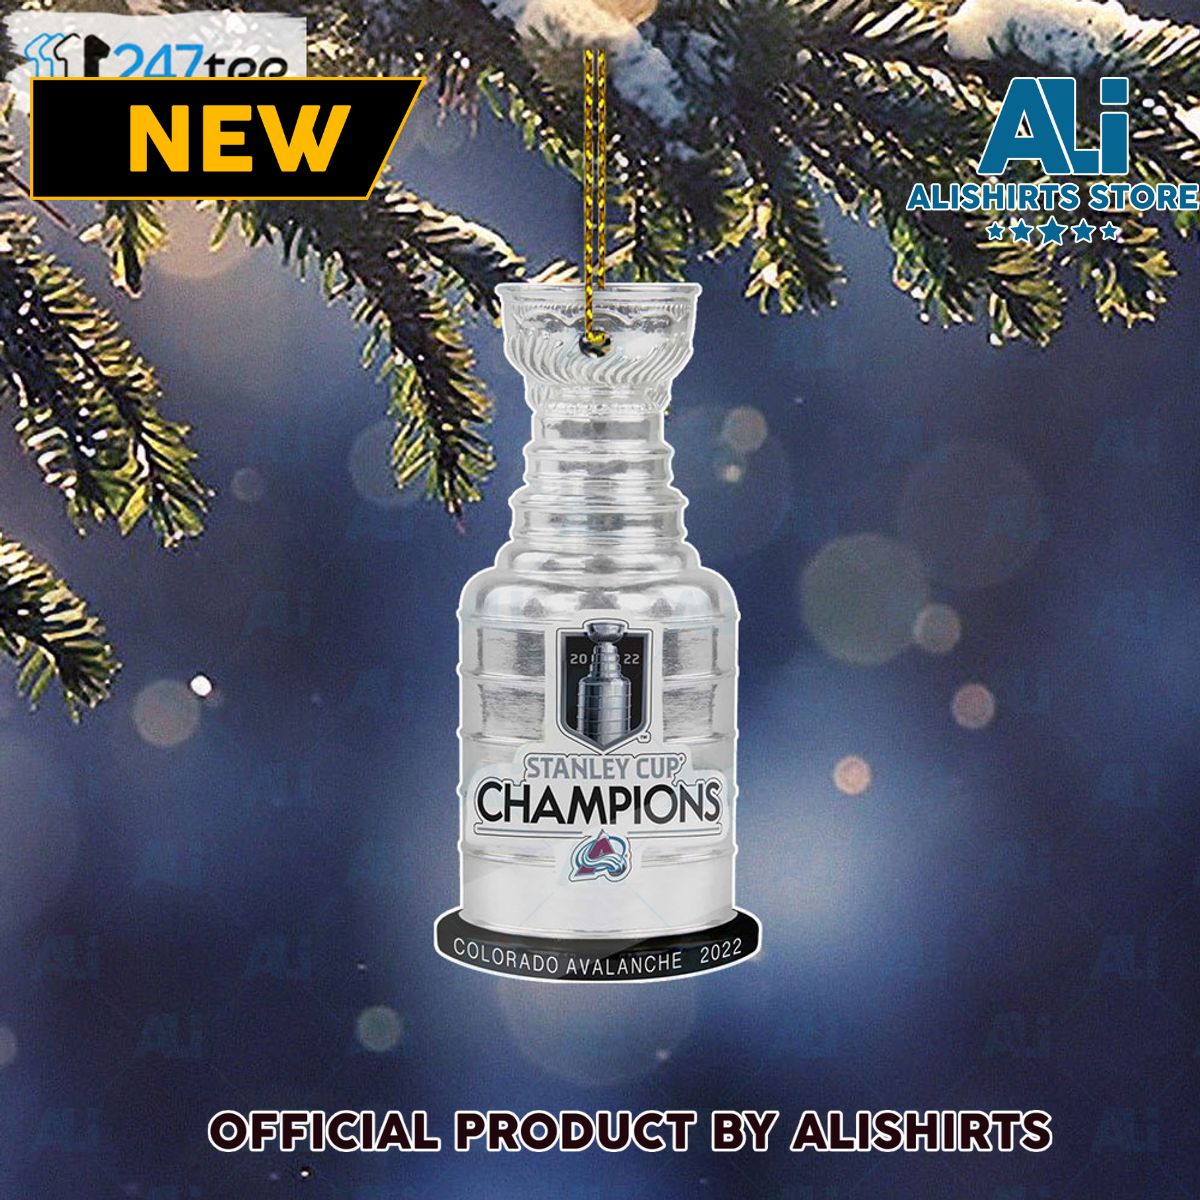 Nhl Colorado Avalanche 2022 Champions Stanley Cup Trophy Christmas Ornament